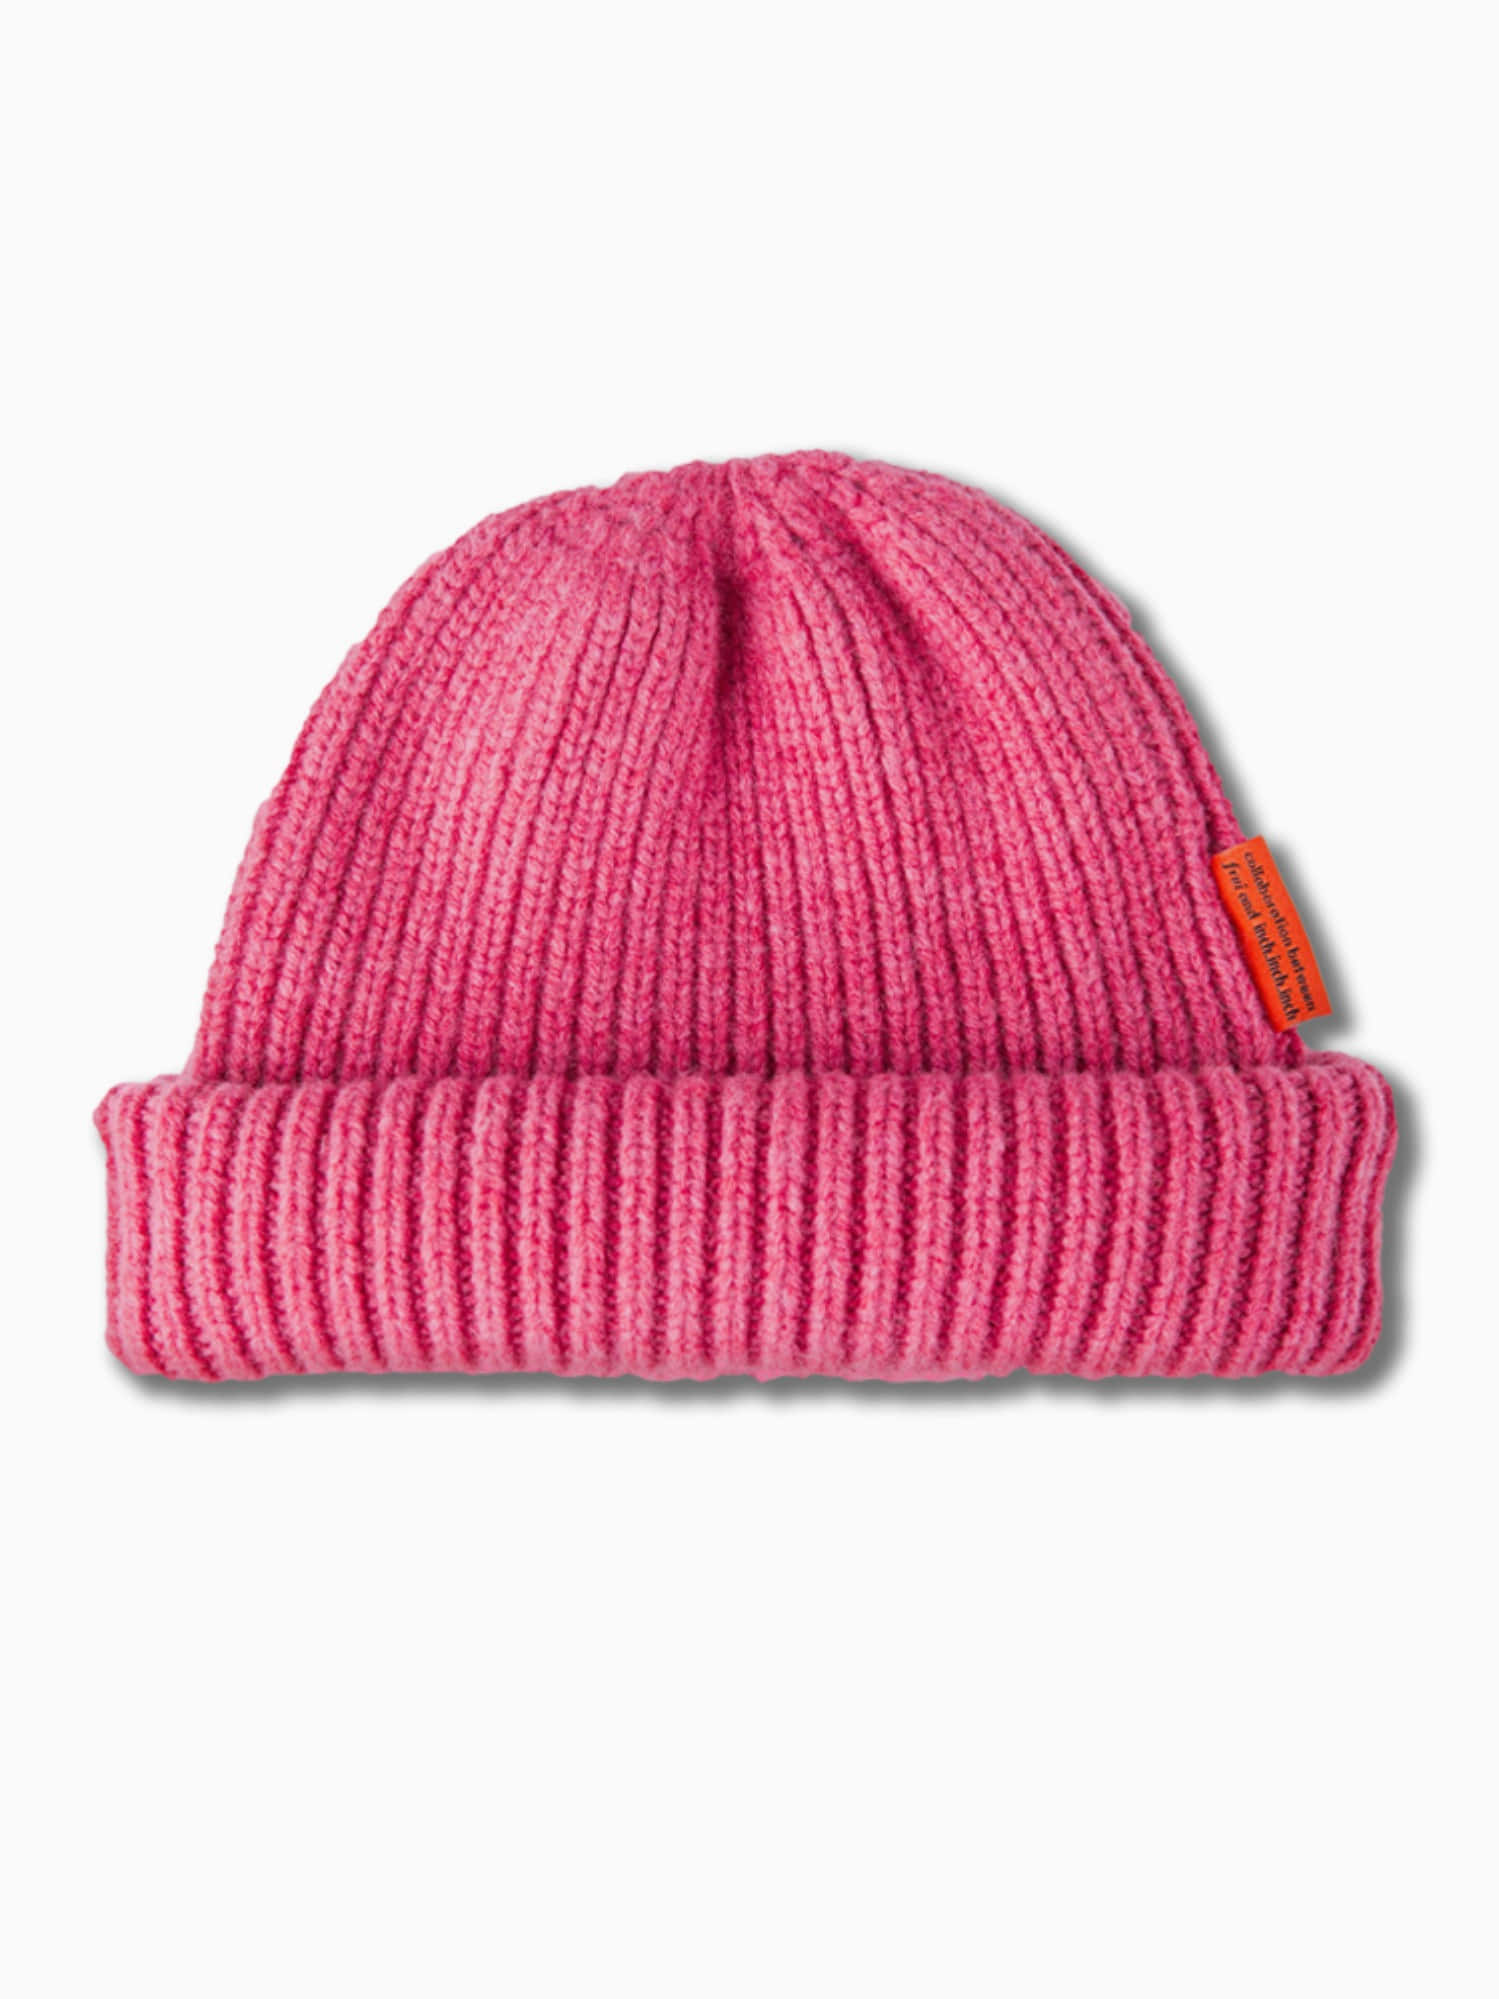 [inch_inch_beanie] Lambs-wool / Coral Pink